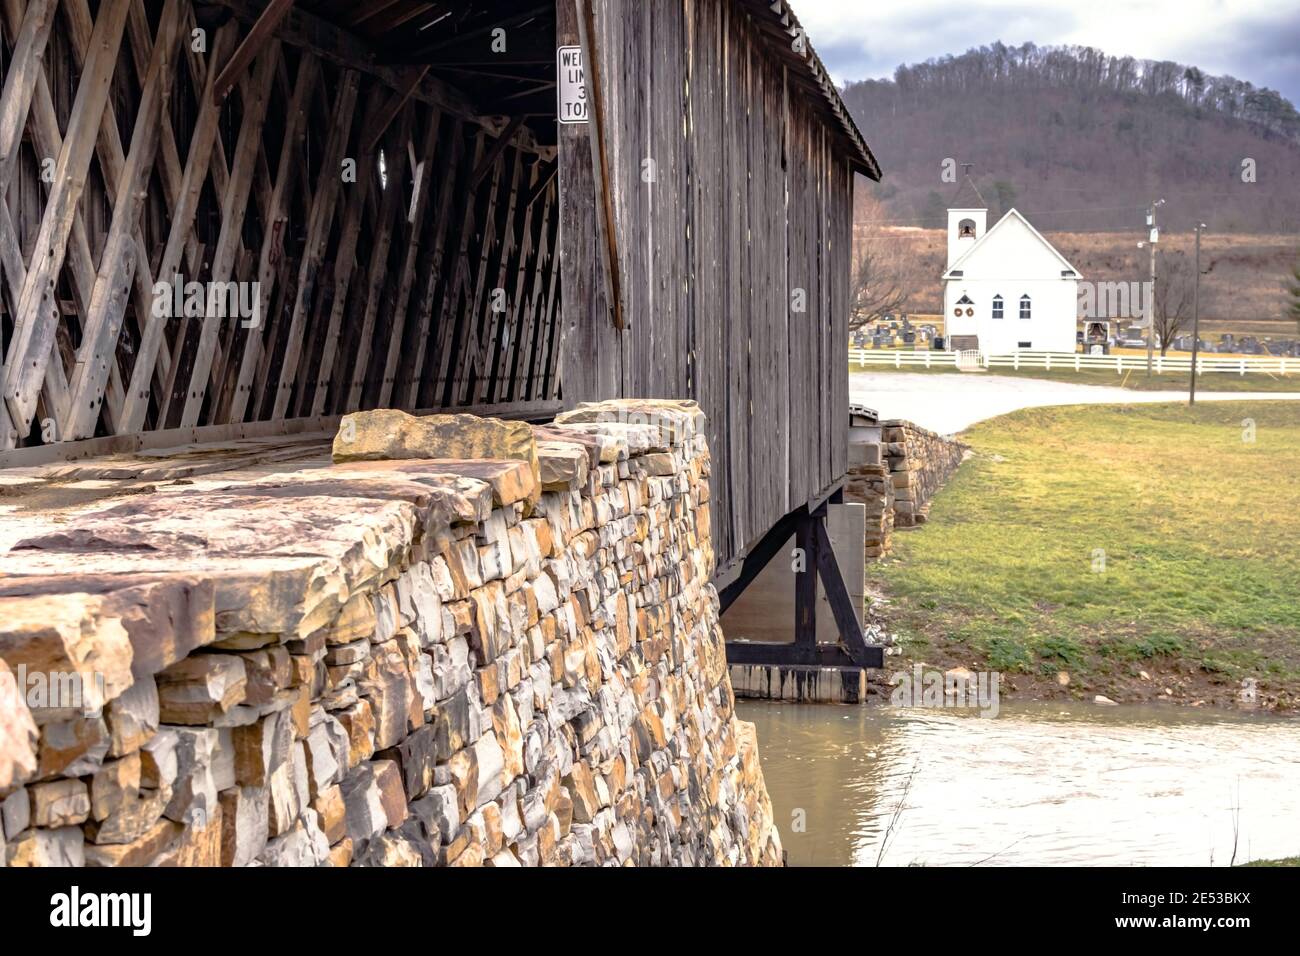 February 26, 2016: Goddard, Kentucky - Goddard White Bridge the only surviving example of Ithiel Town Lattice design in Kentucky. The timbers are join Stock Photo